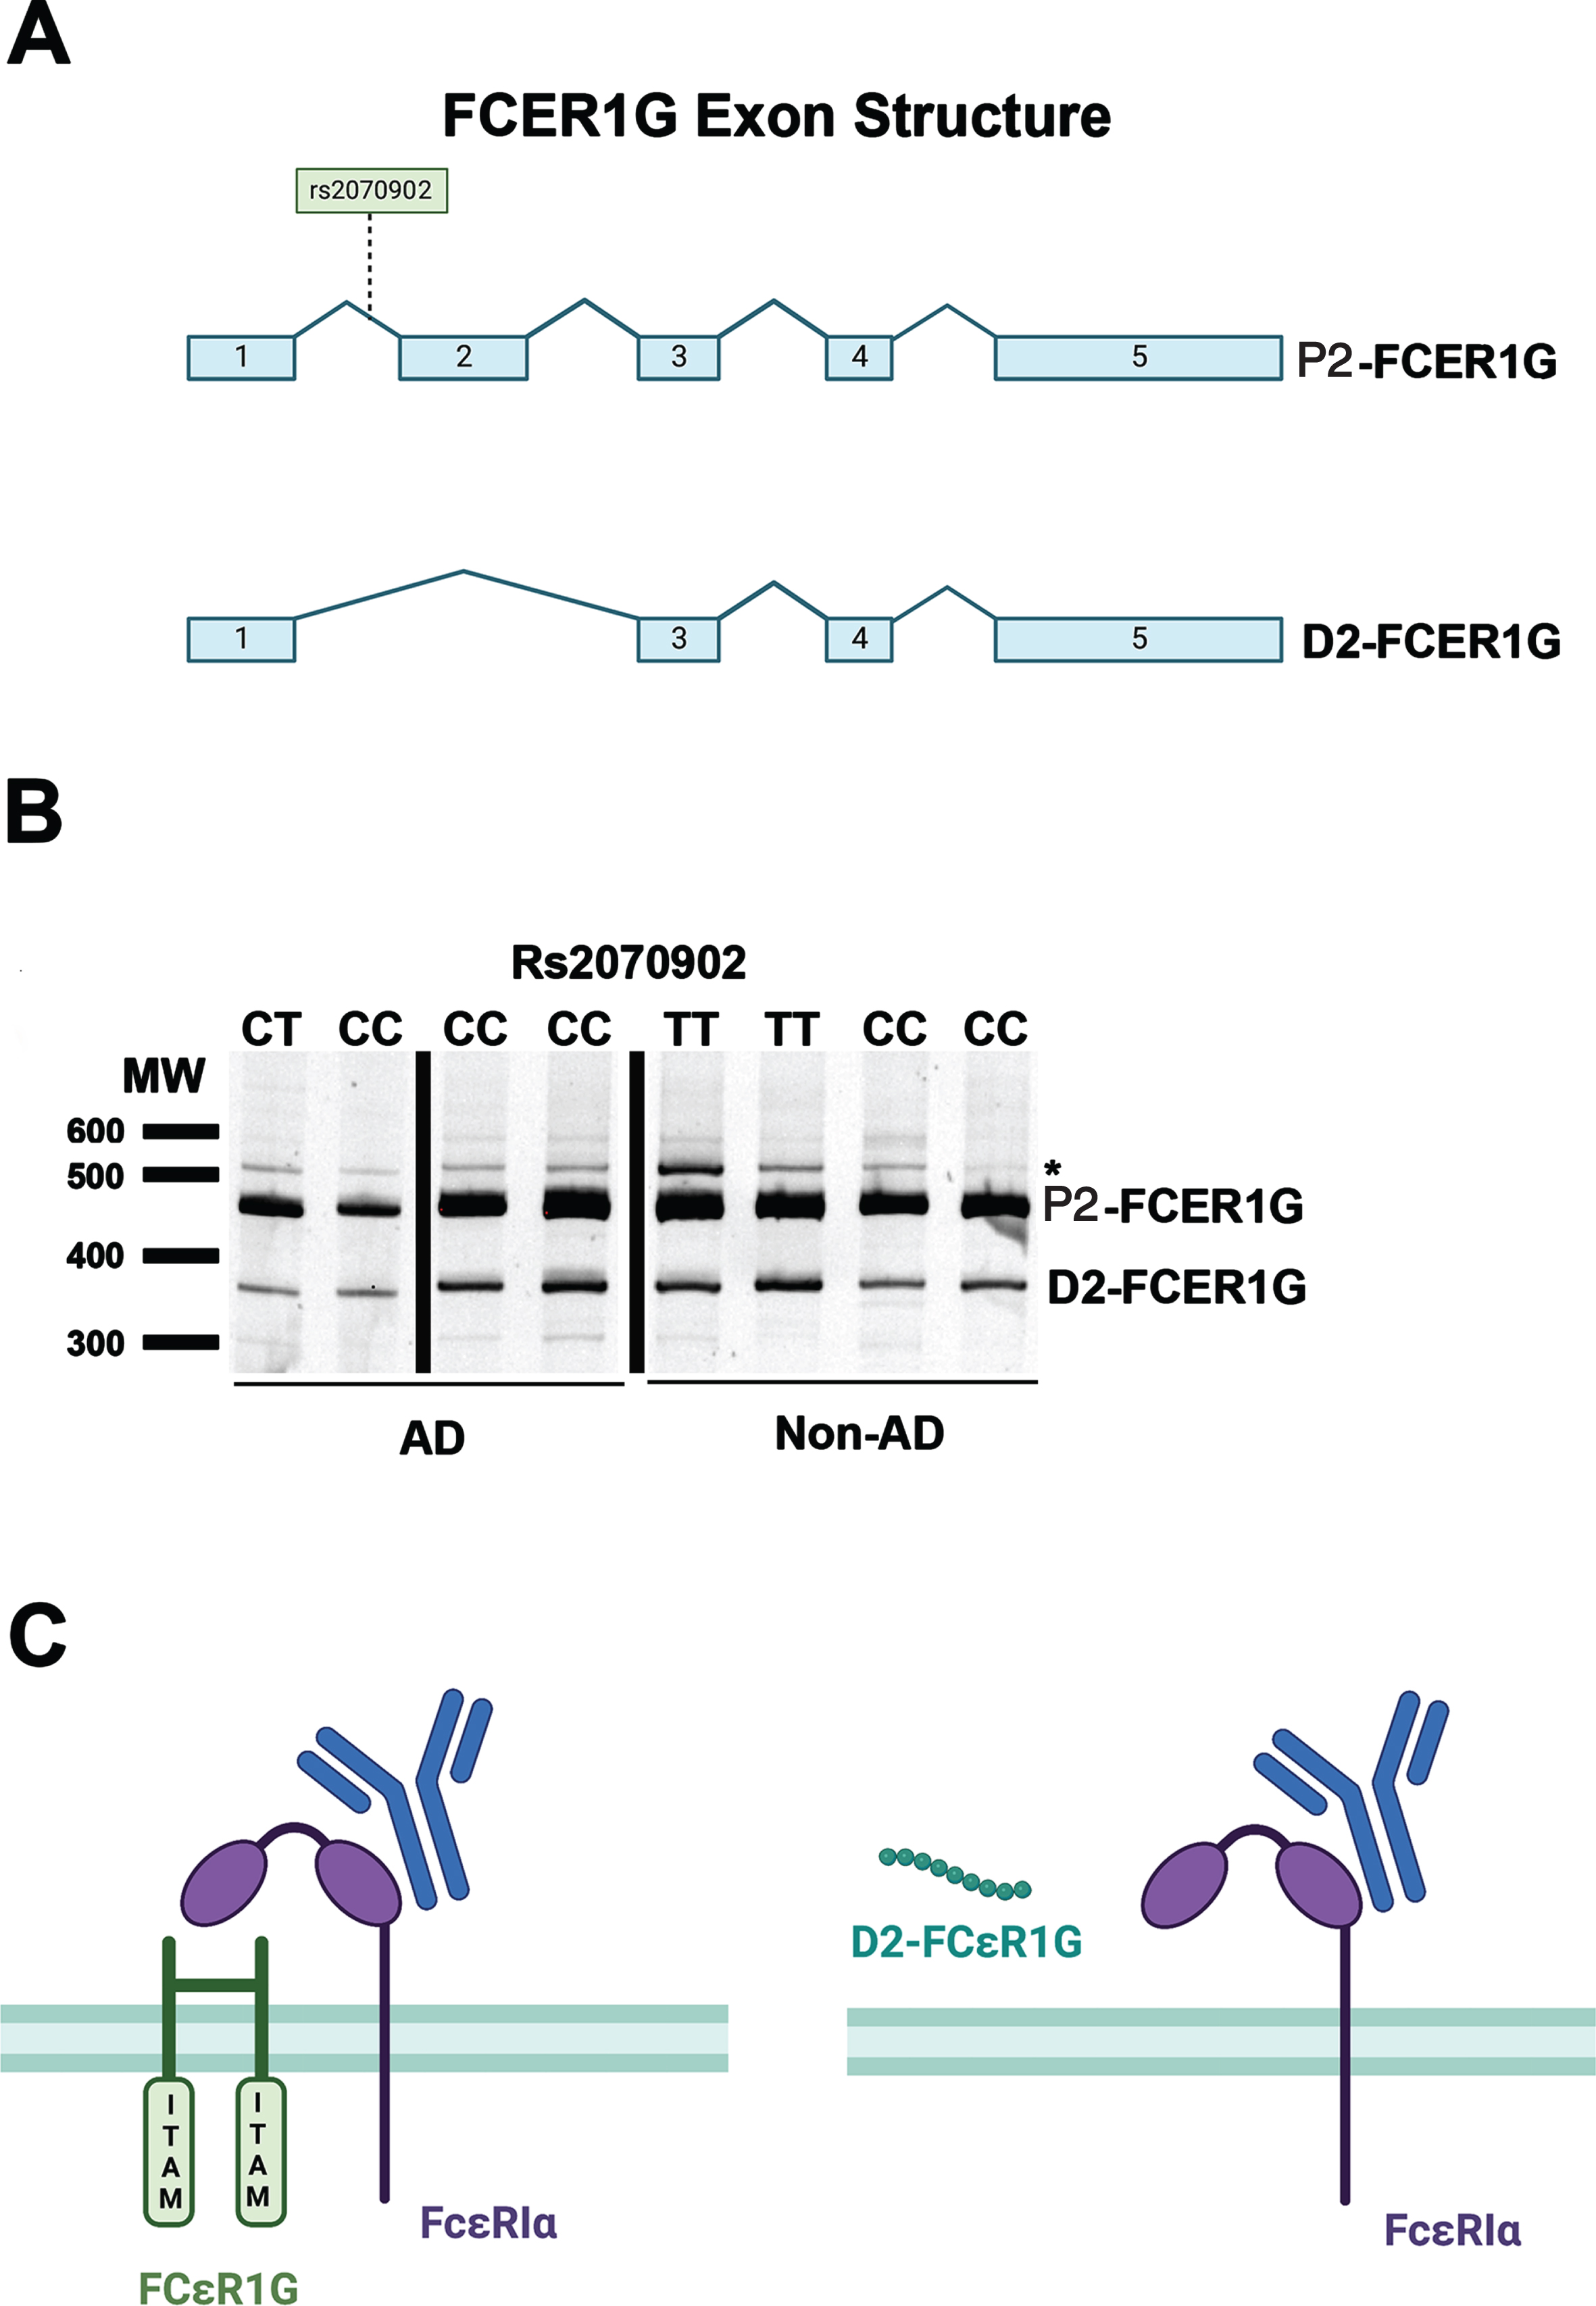 FCER1G isoforms present in human brain. Canonical FCER1G consists of five exons (A). PCR amplification from exon 1 to exon 5 in AD and non-AD brain samples with different rs2070902 genotypes (CC, CT, or TT) generated qualitatively similar results in that (i) the primary FCER1G isoform consists of prototypic FCER1G that contains exons 1, 2, 3, 4, and 5, and (ii) D2-FCER1G, which lacks exon 2, was the primary variant FCER1G isoform and was present regardless of AD neuropathology or rs2070902 genotype status (B). Note that these PCR products were directly sequenced to confirm the identities of P2-FCER1G and D2-FCER1G. Further, the PCR product labeled * was found to be derived from HSPA1B and hence represents a non-specific PCR product (B). Prototypic FcRγ exists as a disulfide linked dimer that uses its ITAM domains to mediate signaling from antibody-stimulated FcɛRIα (C). Although only FcɛRIα is depicted, FcRγ also mediates signaling from other Fc receptors such as FcγRI, FcγRIIIa, and FcαRI as well as immune receptors such as GPVI, OSCAR, PIR-A, Dectin-2, γδTCR, and IL-3R [8]. Loss of FCER1G exon 2 results in a premature stop codon such that D2-FCER1G encodes only a nine amino acid peptide fragment (C). This fragment consists of the signal peptide sequence and does not include the ITAM domain (C). Hence, the peptide encoded by D2-FCER1G appears to represent a complete loss of functional FcRγ.